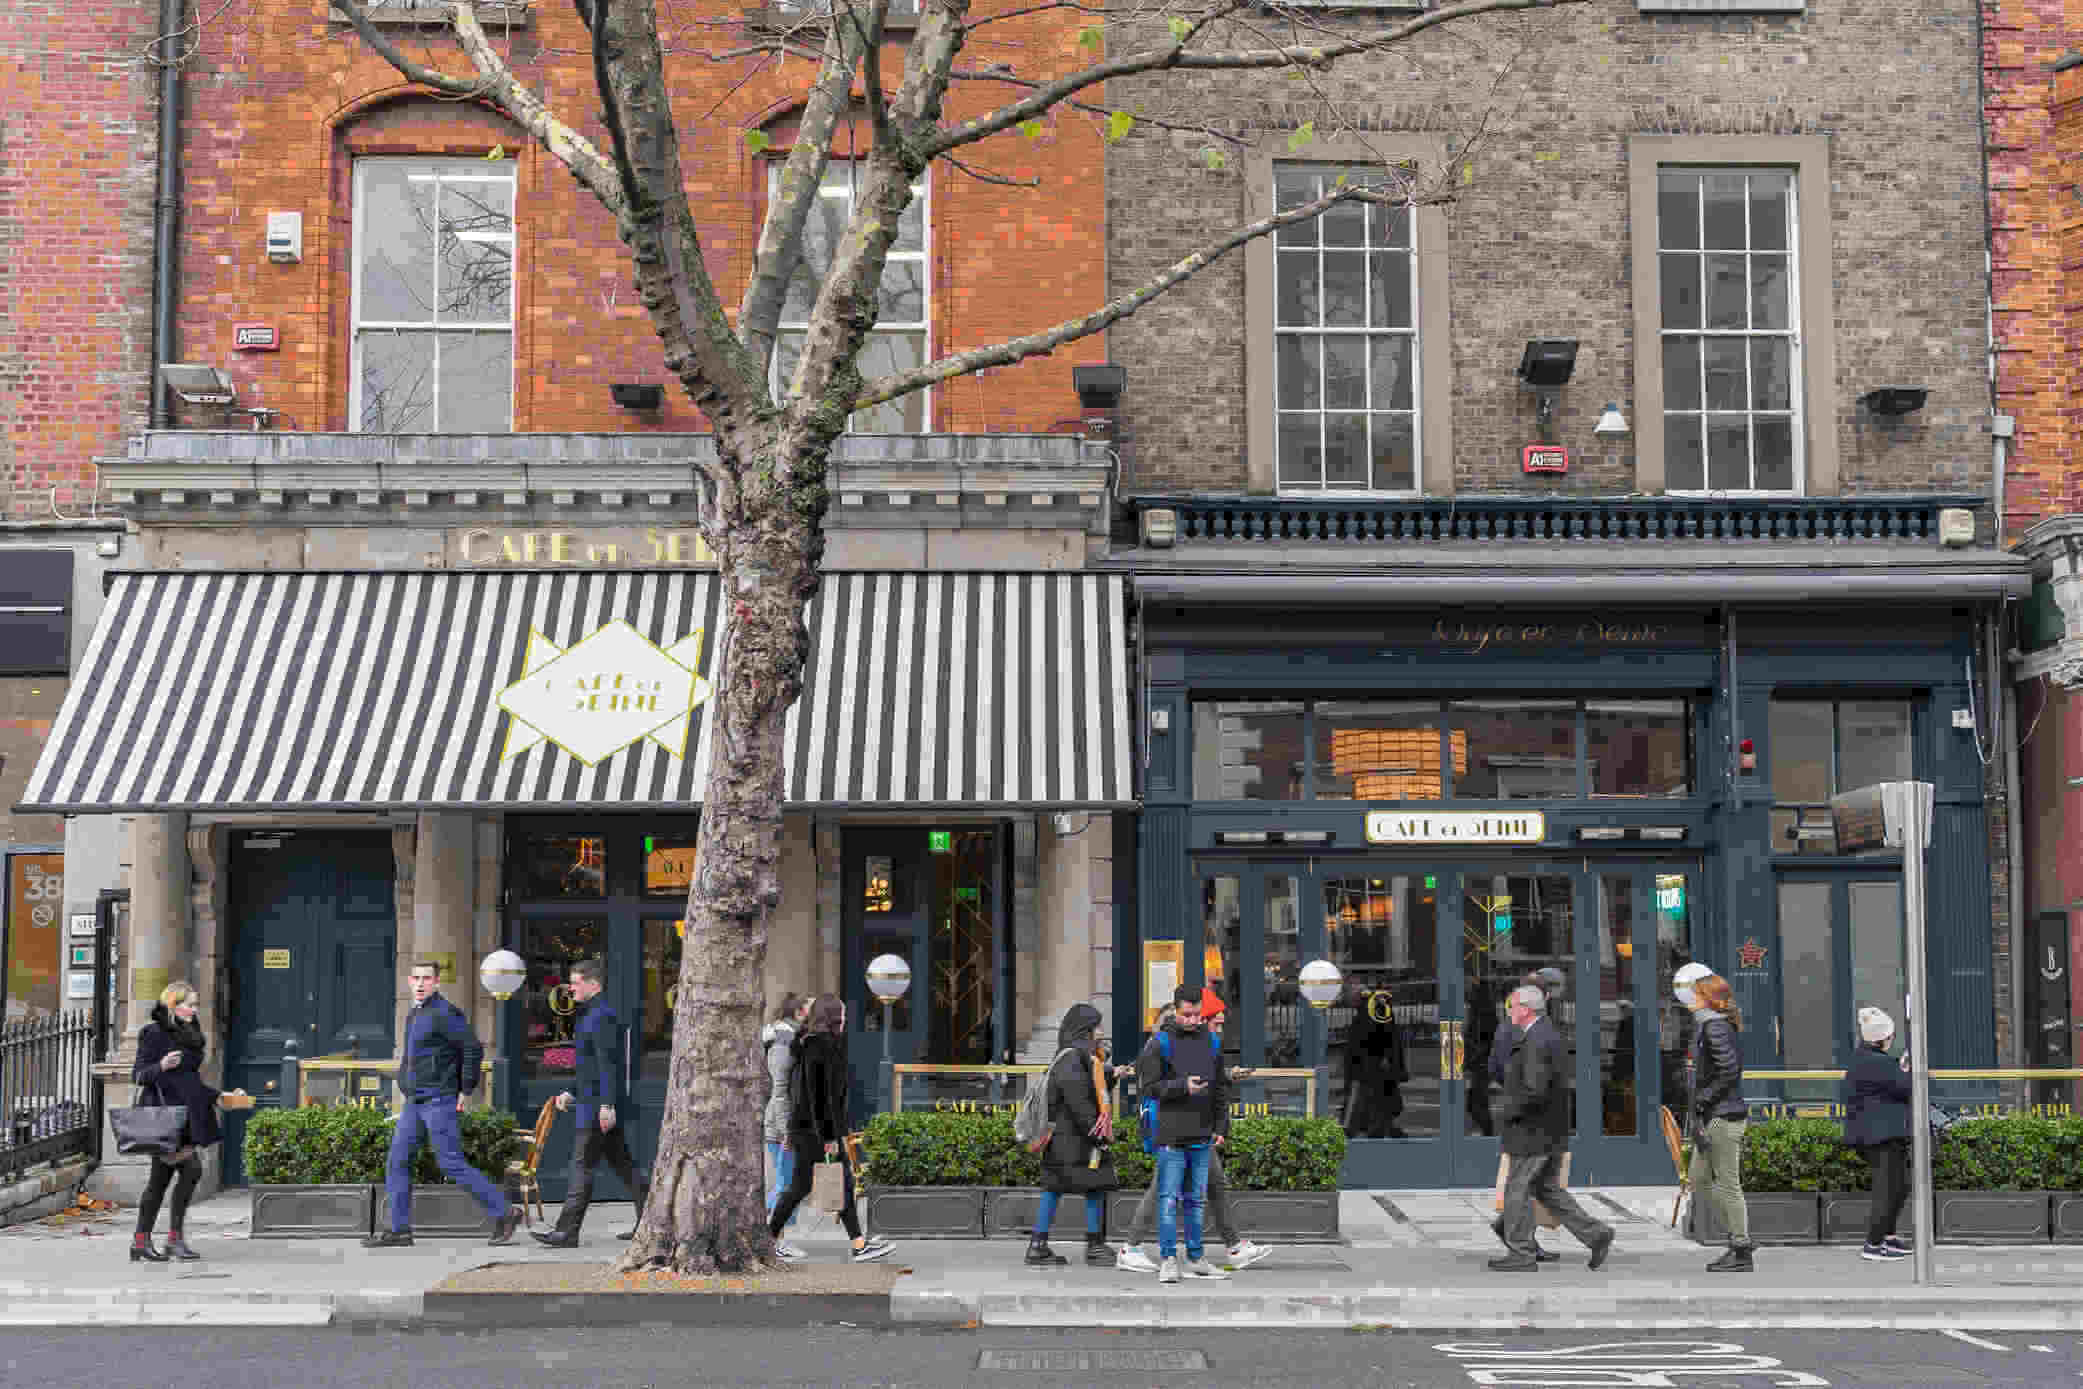 Operating Profits at the owners of such licensed icons as Whelans and Café en Seine fell 84% to €95,058 from €586,771 the previous year.